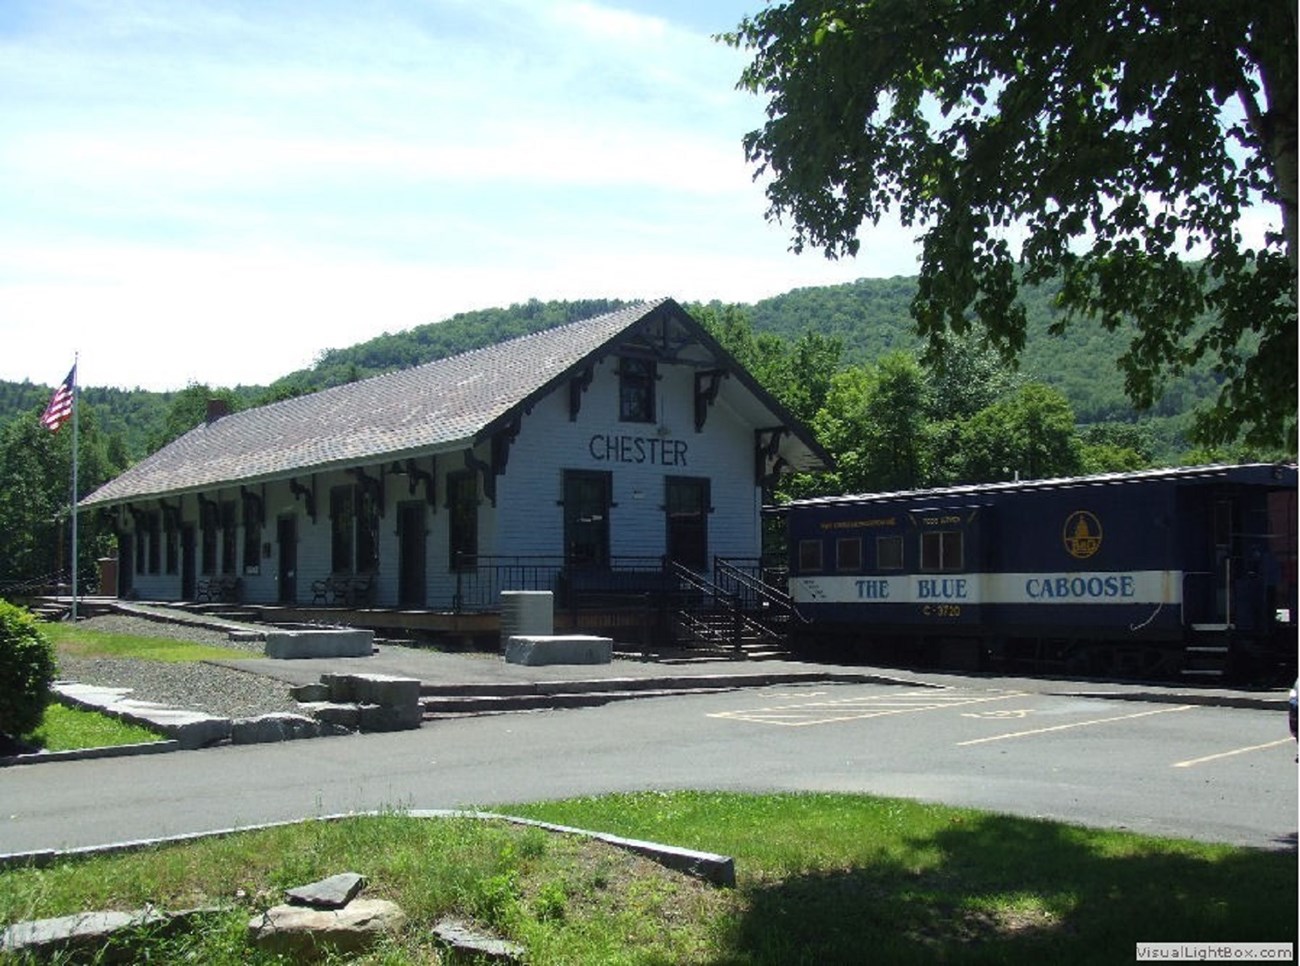 The Chester Railroad Station is still in its historic, original condition. The wooden caboose is available for overnight camping.